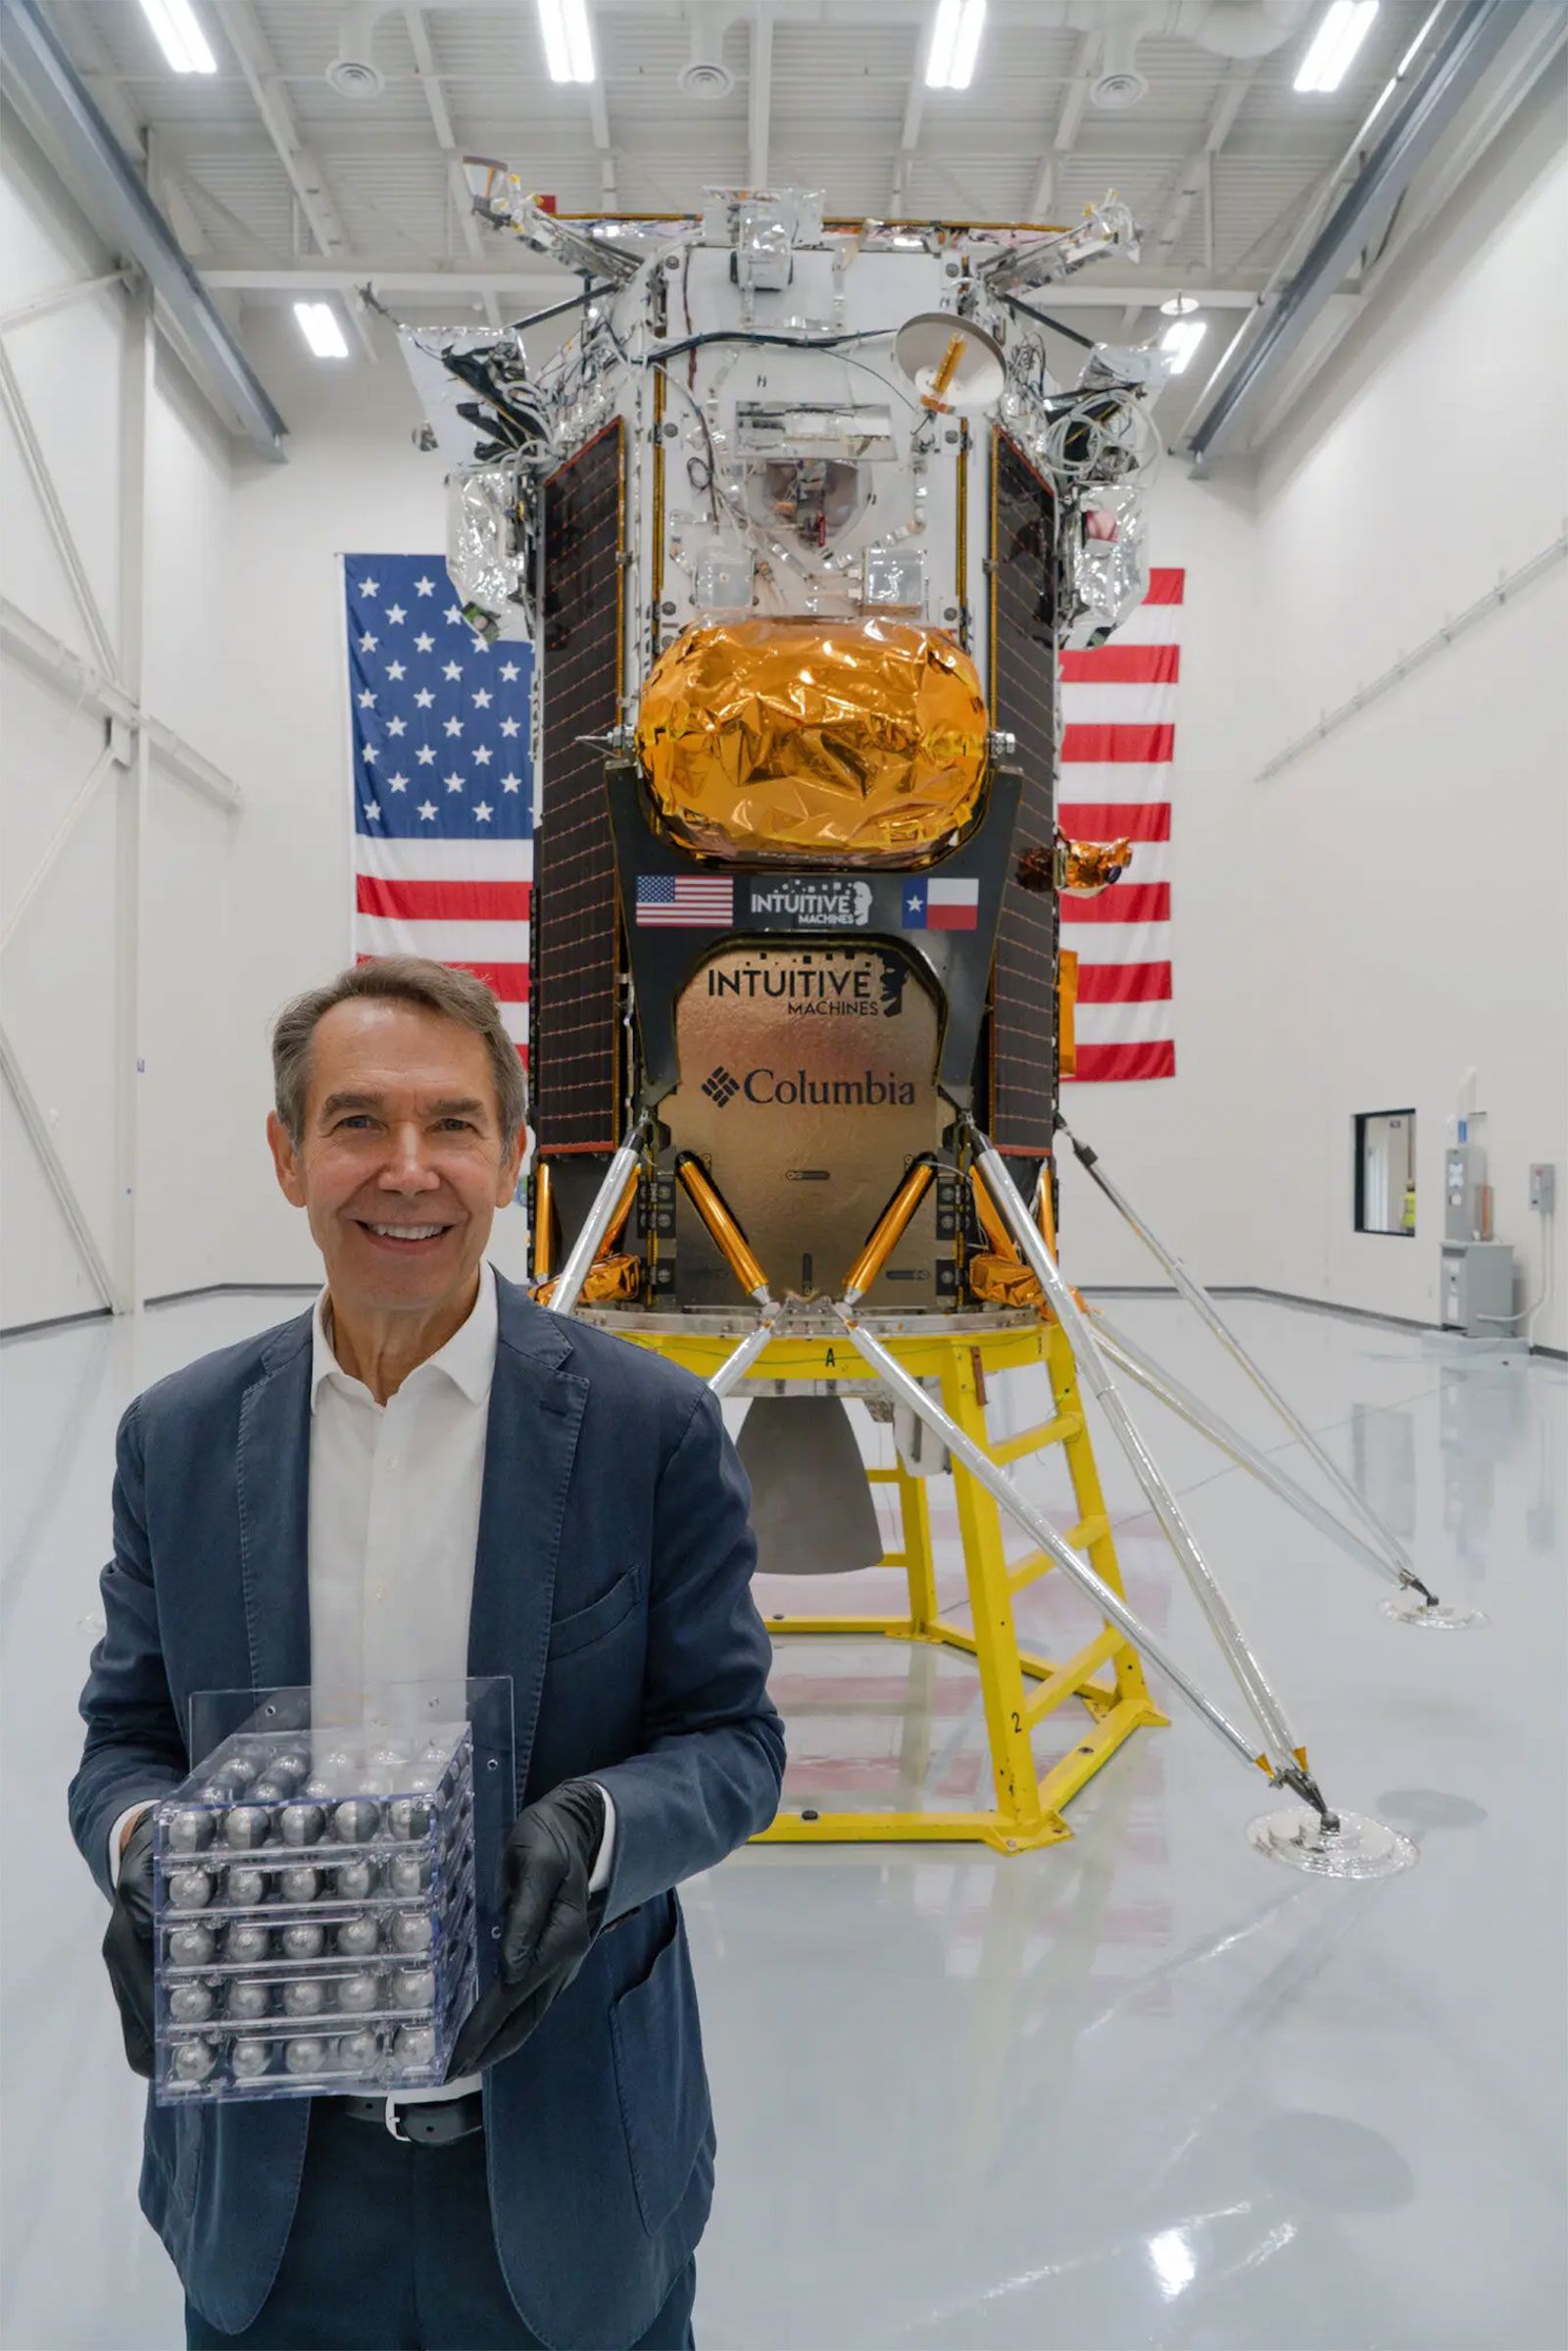 Artist Jeff Koons makes history with a sculpture on the moon